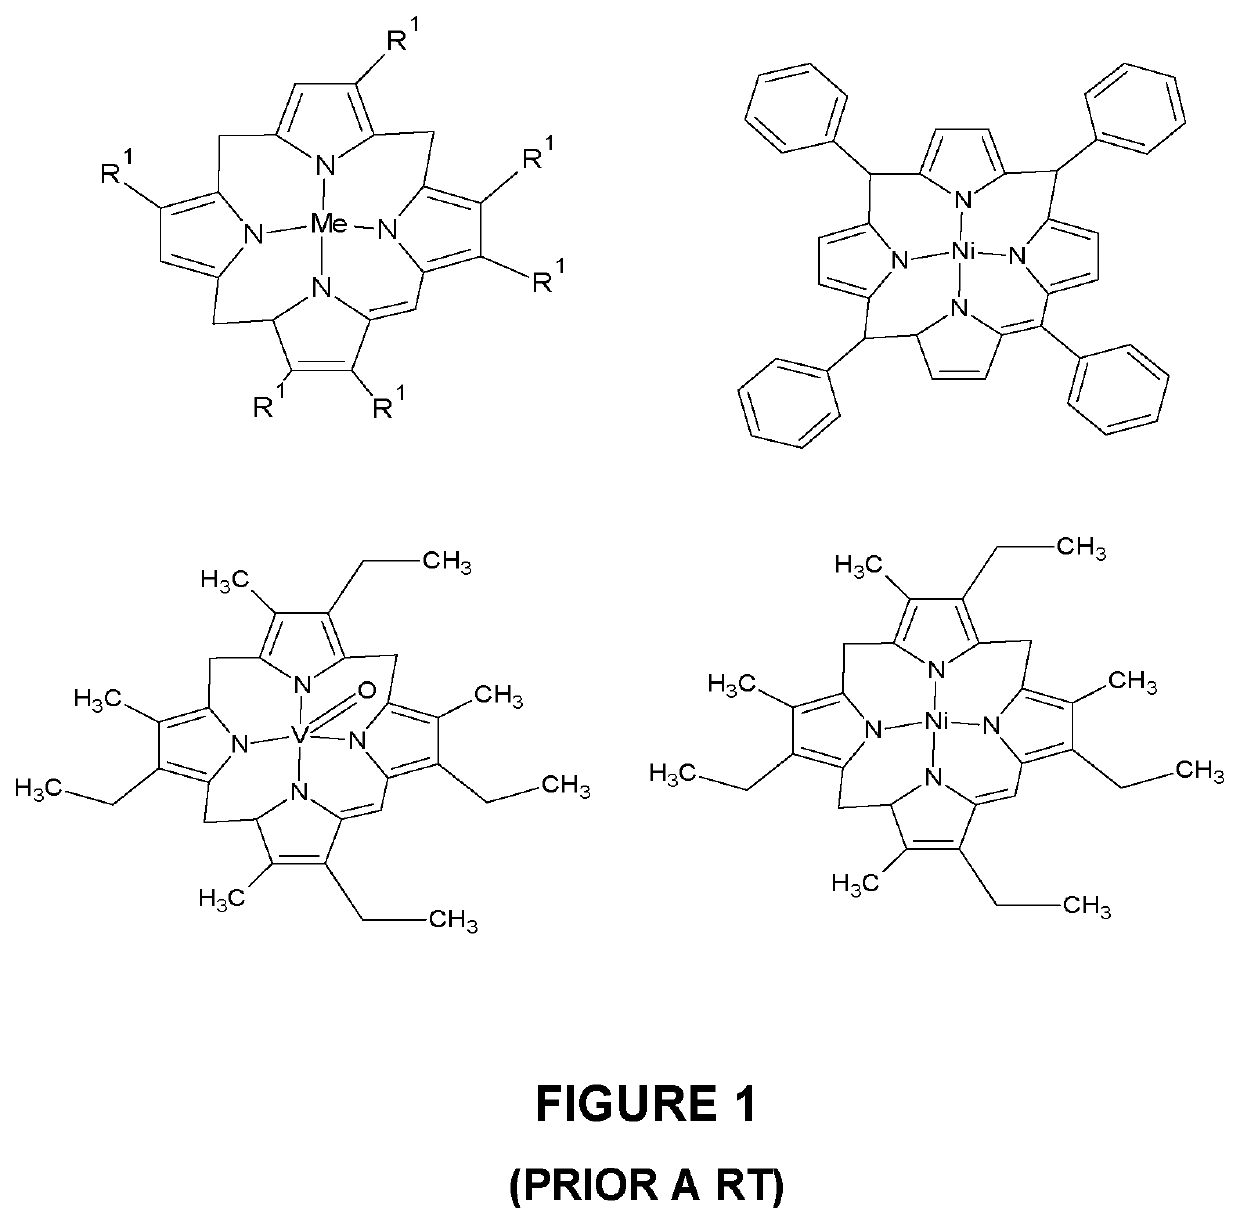 Process for removing metals in petroleum oil using an organophosphorus compound and microwaves